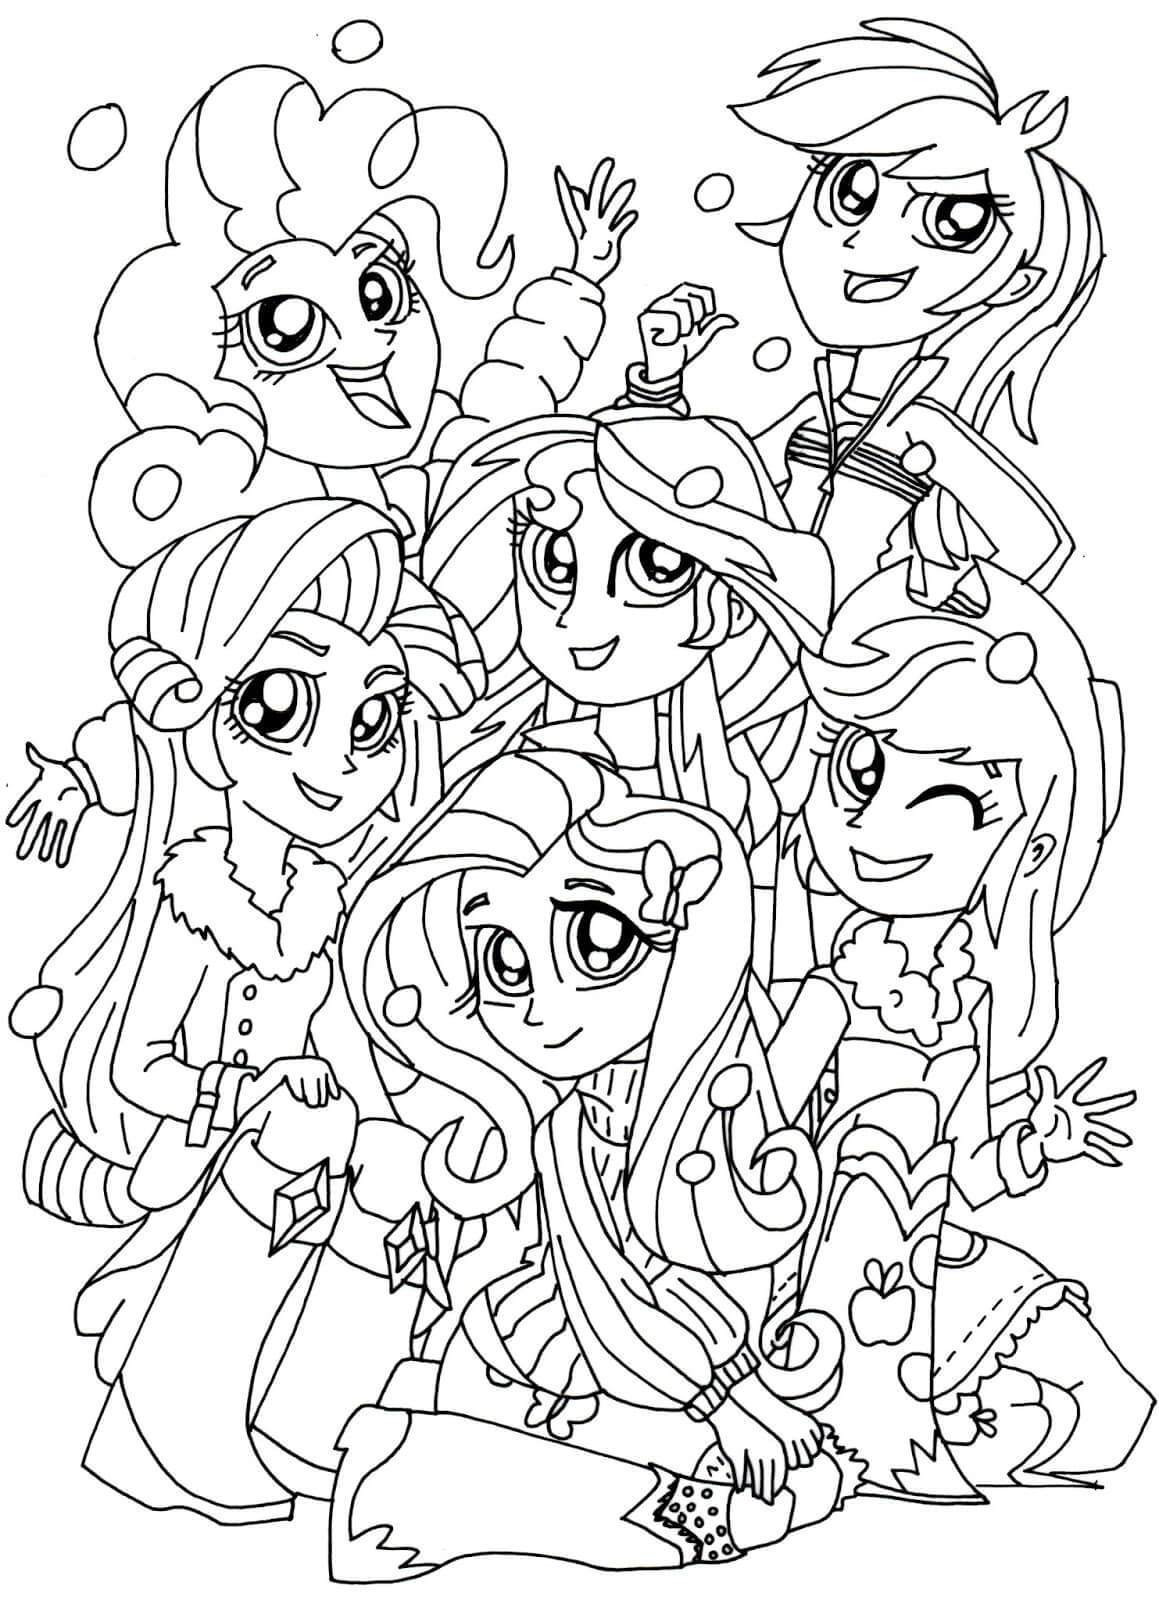 Coloring Sheets For Girls Mlp
 My Little Pony Equestria Girls Coloring Pages